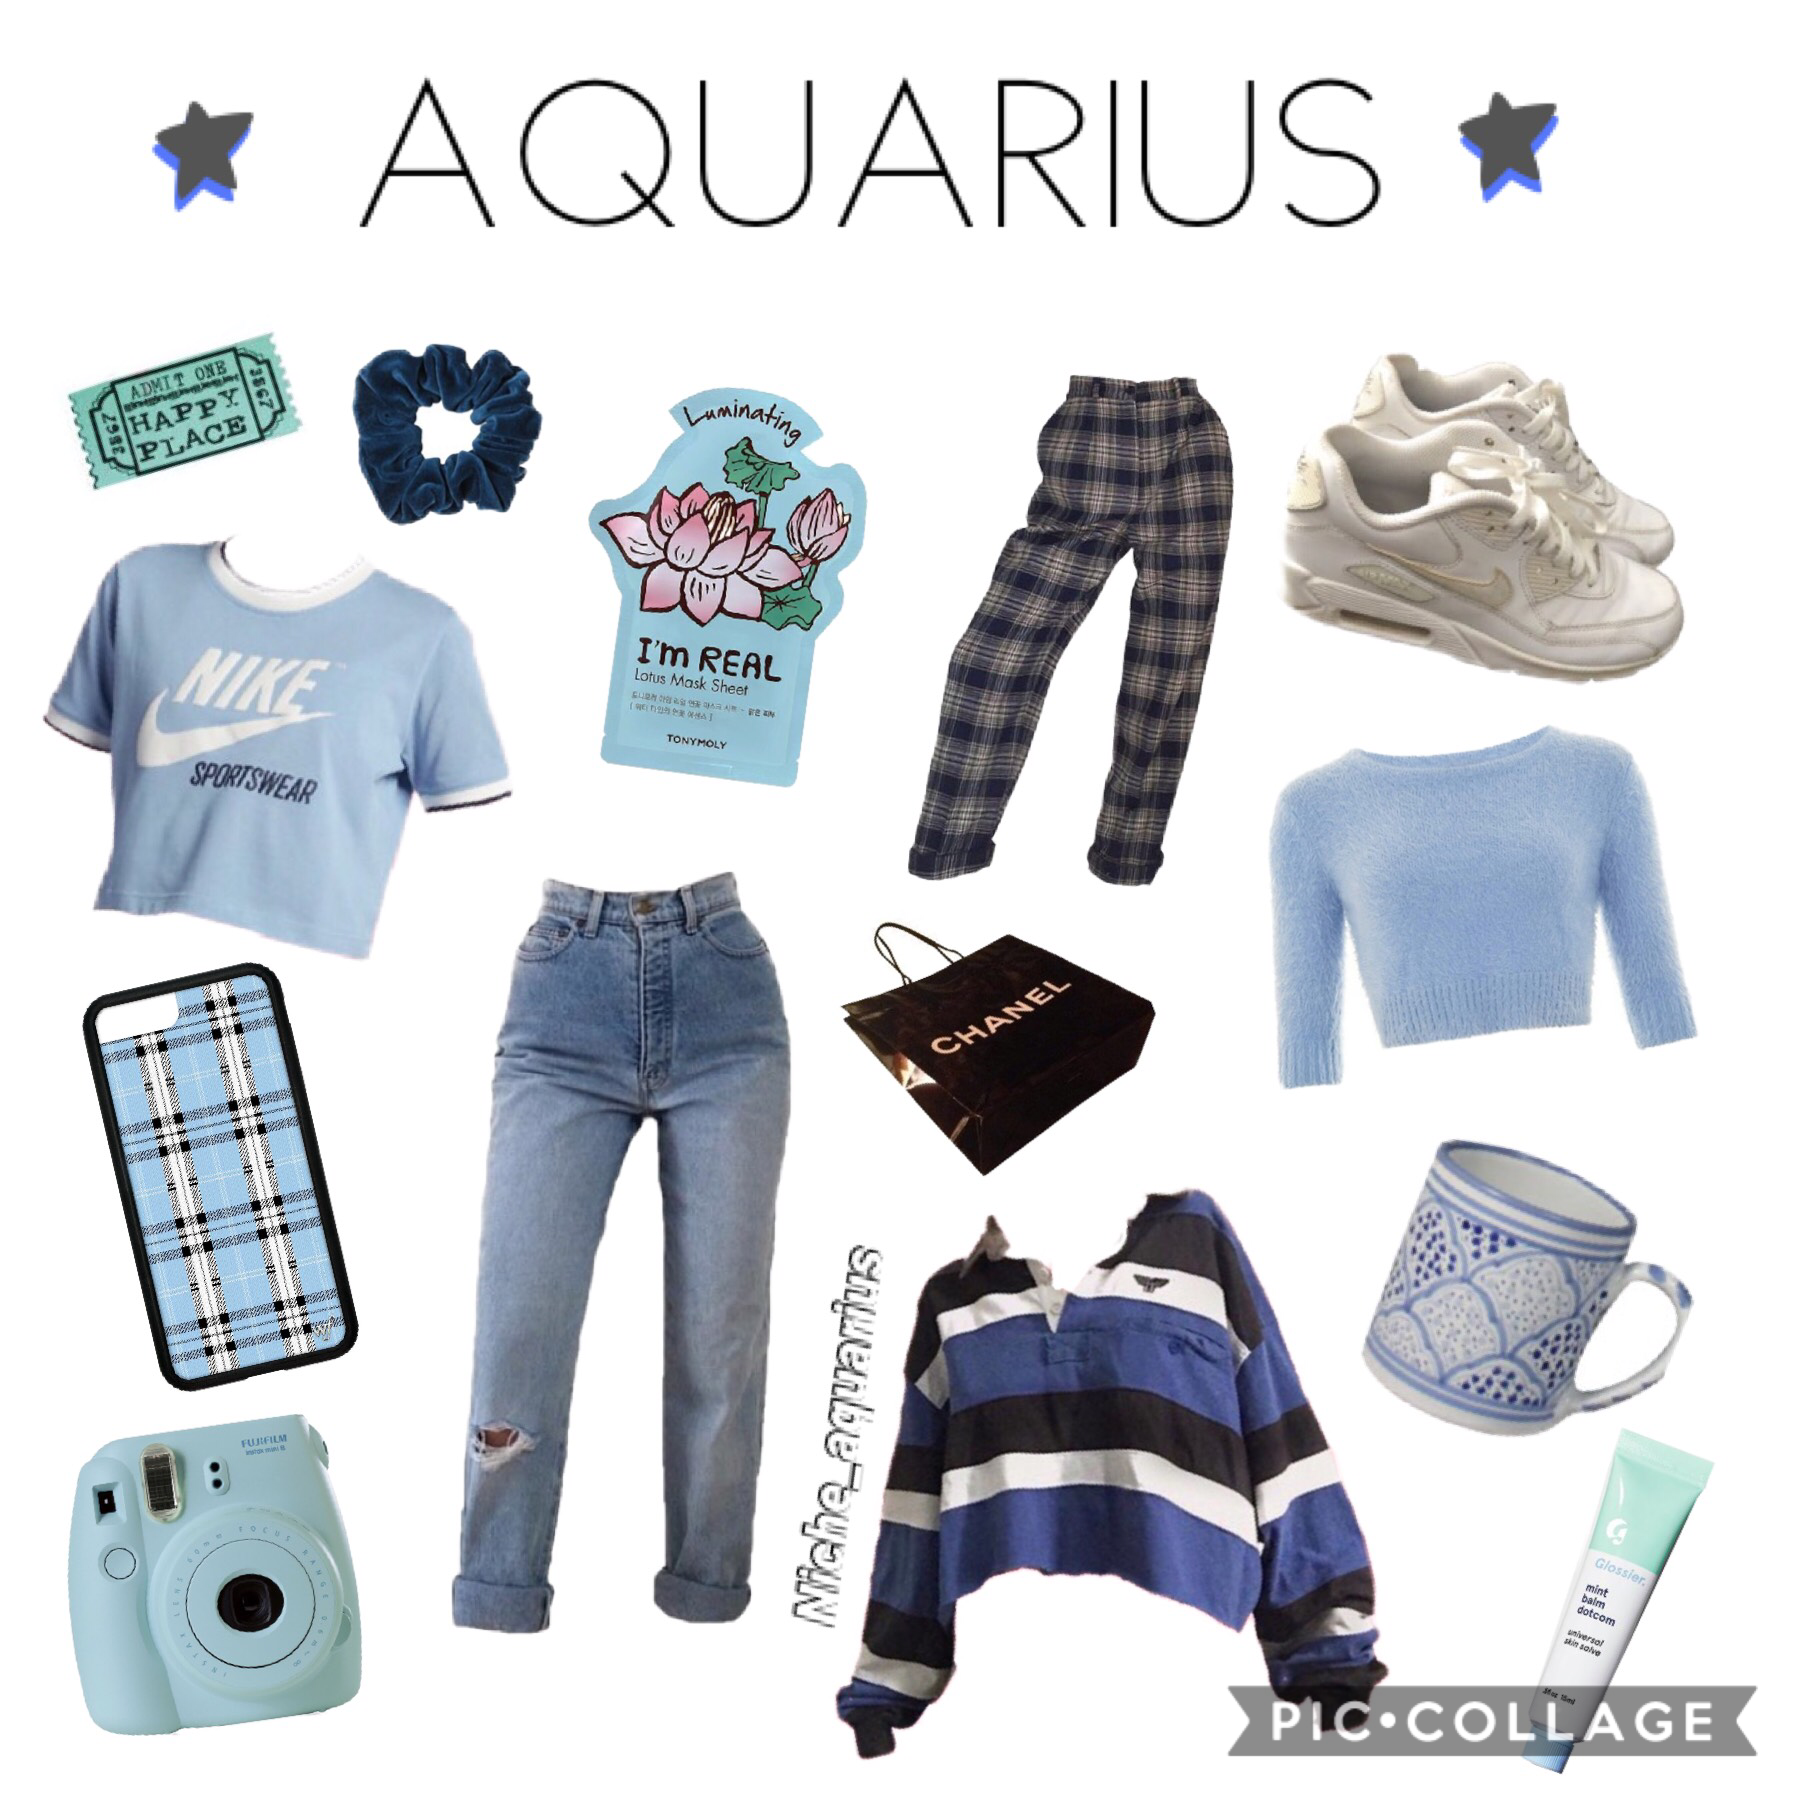 ♒️💙TAP💙♒️

I tried to do something a little different this time so I hope you like it💕
I did Aquarius first cos I’m an Aquarius and I feel like they are always forgotten😂
I also tried to do an animation on it but it didn’t let me share it with it☹️